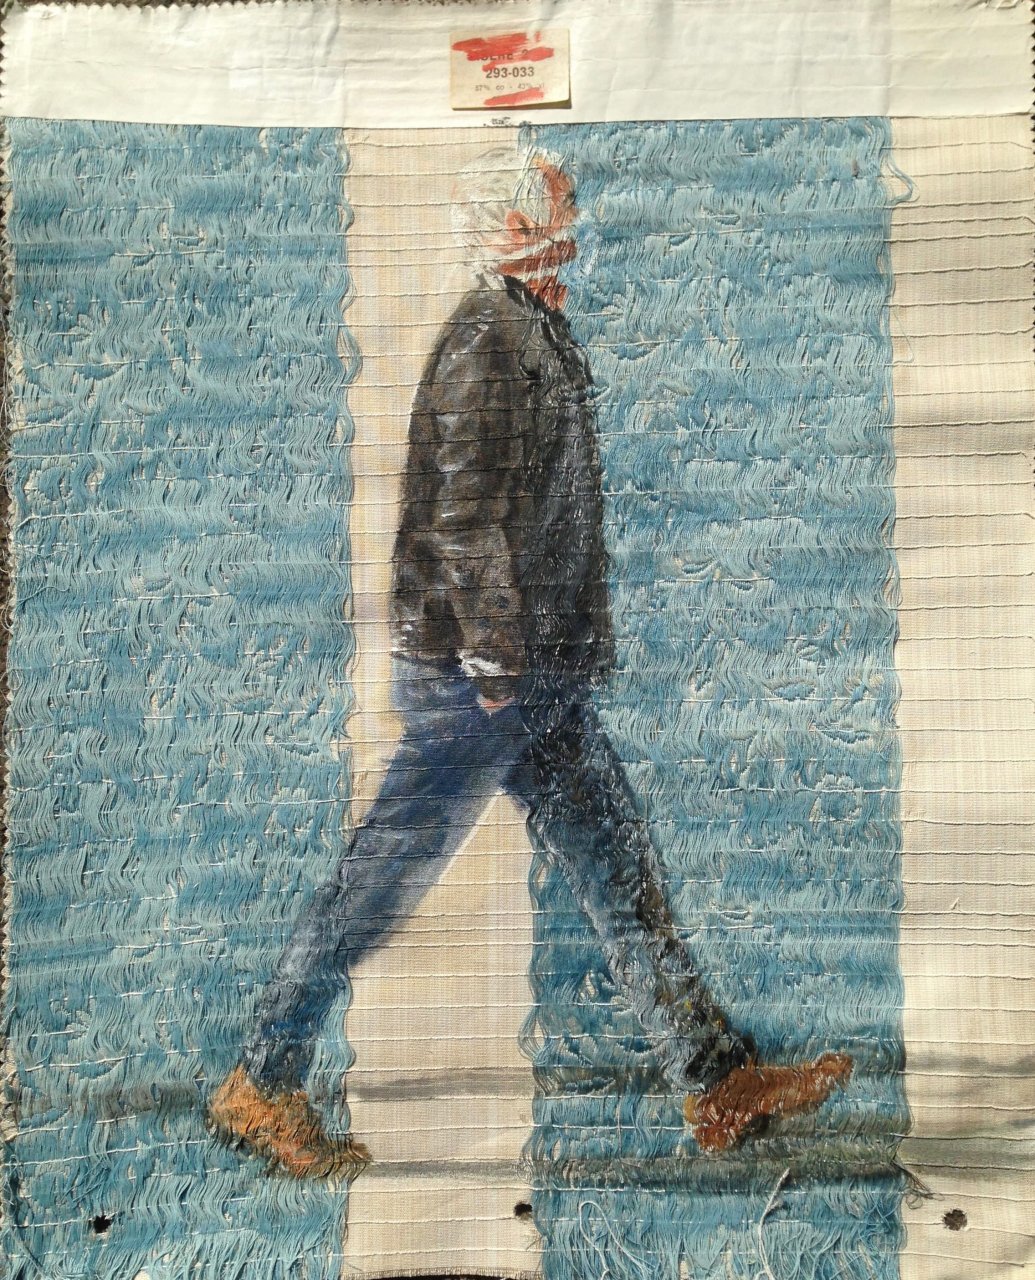 Times of Covid, 2020 - 2- Mixed technique on fabric - cm. 37,5X30